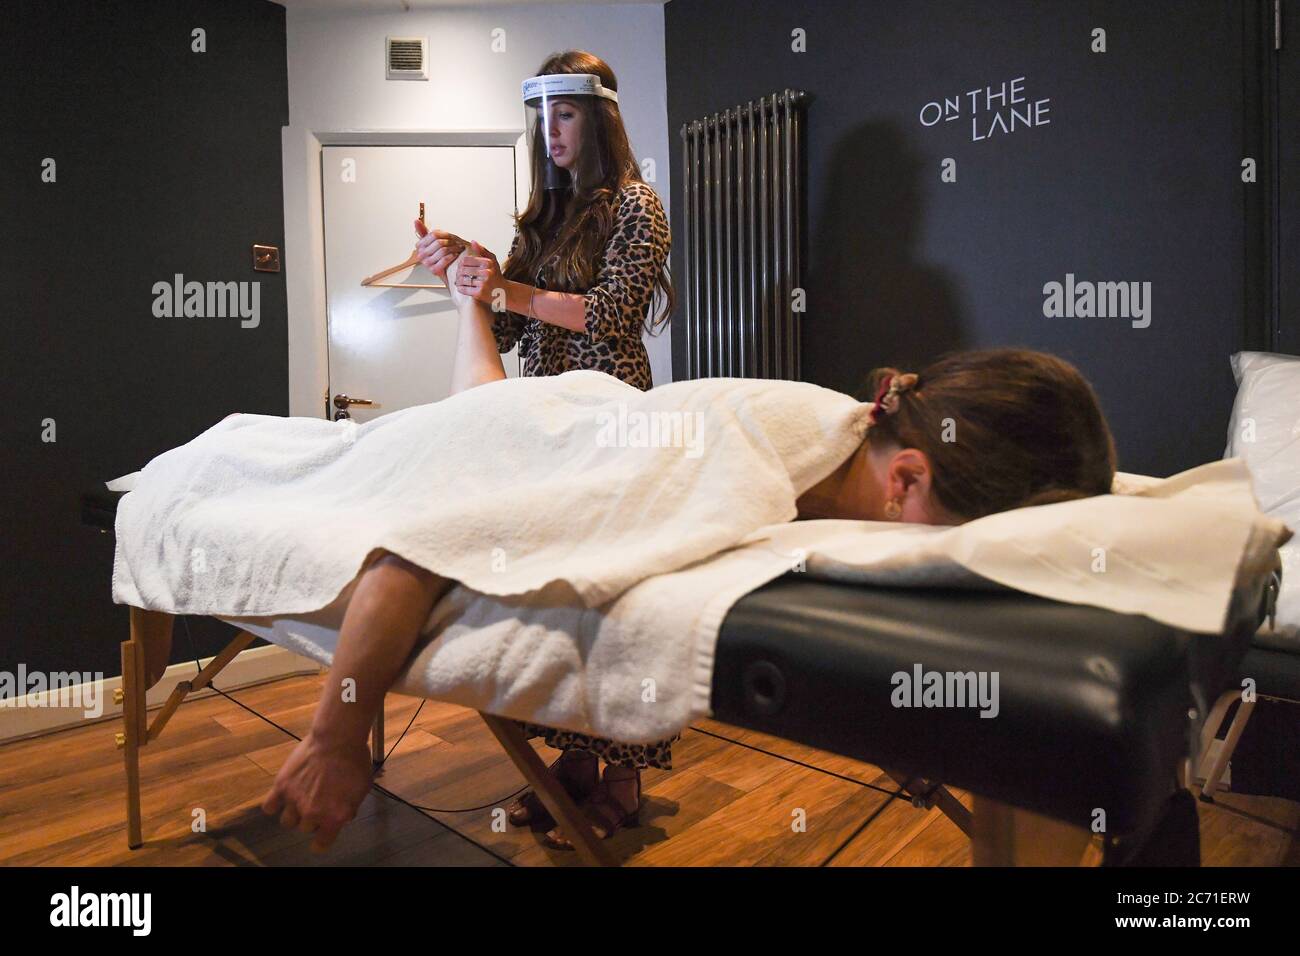 Facialist Taryn Williams massages client Annie Geurard at Taryn Aesthetics at On The Lane beauty salon in Belsize Park, London, as they reopen to customers following the easing of lockdown restrictions in England. Stock Photo